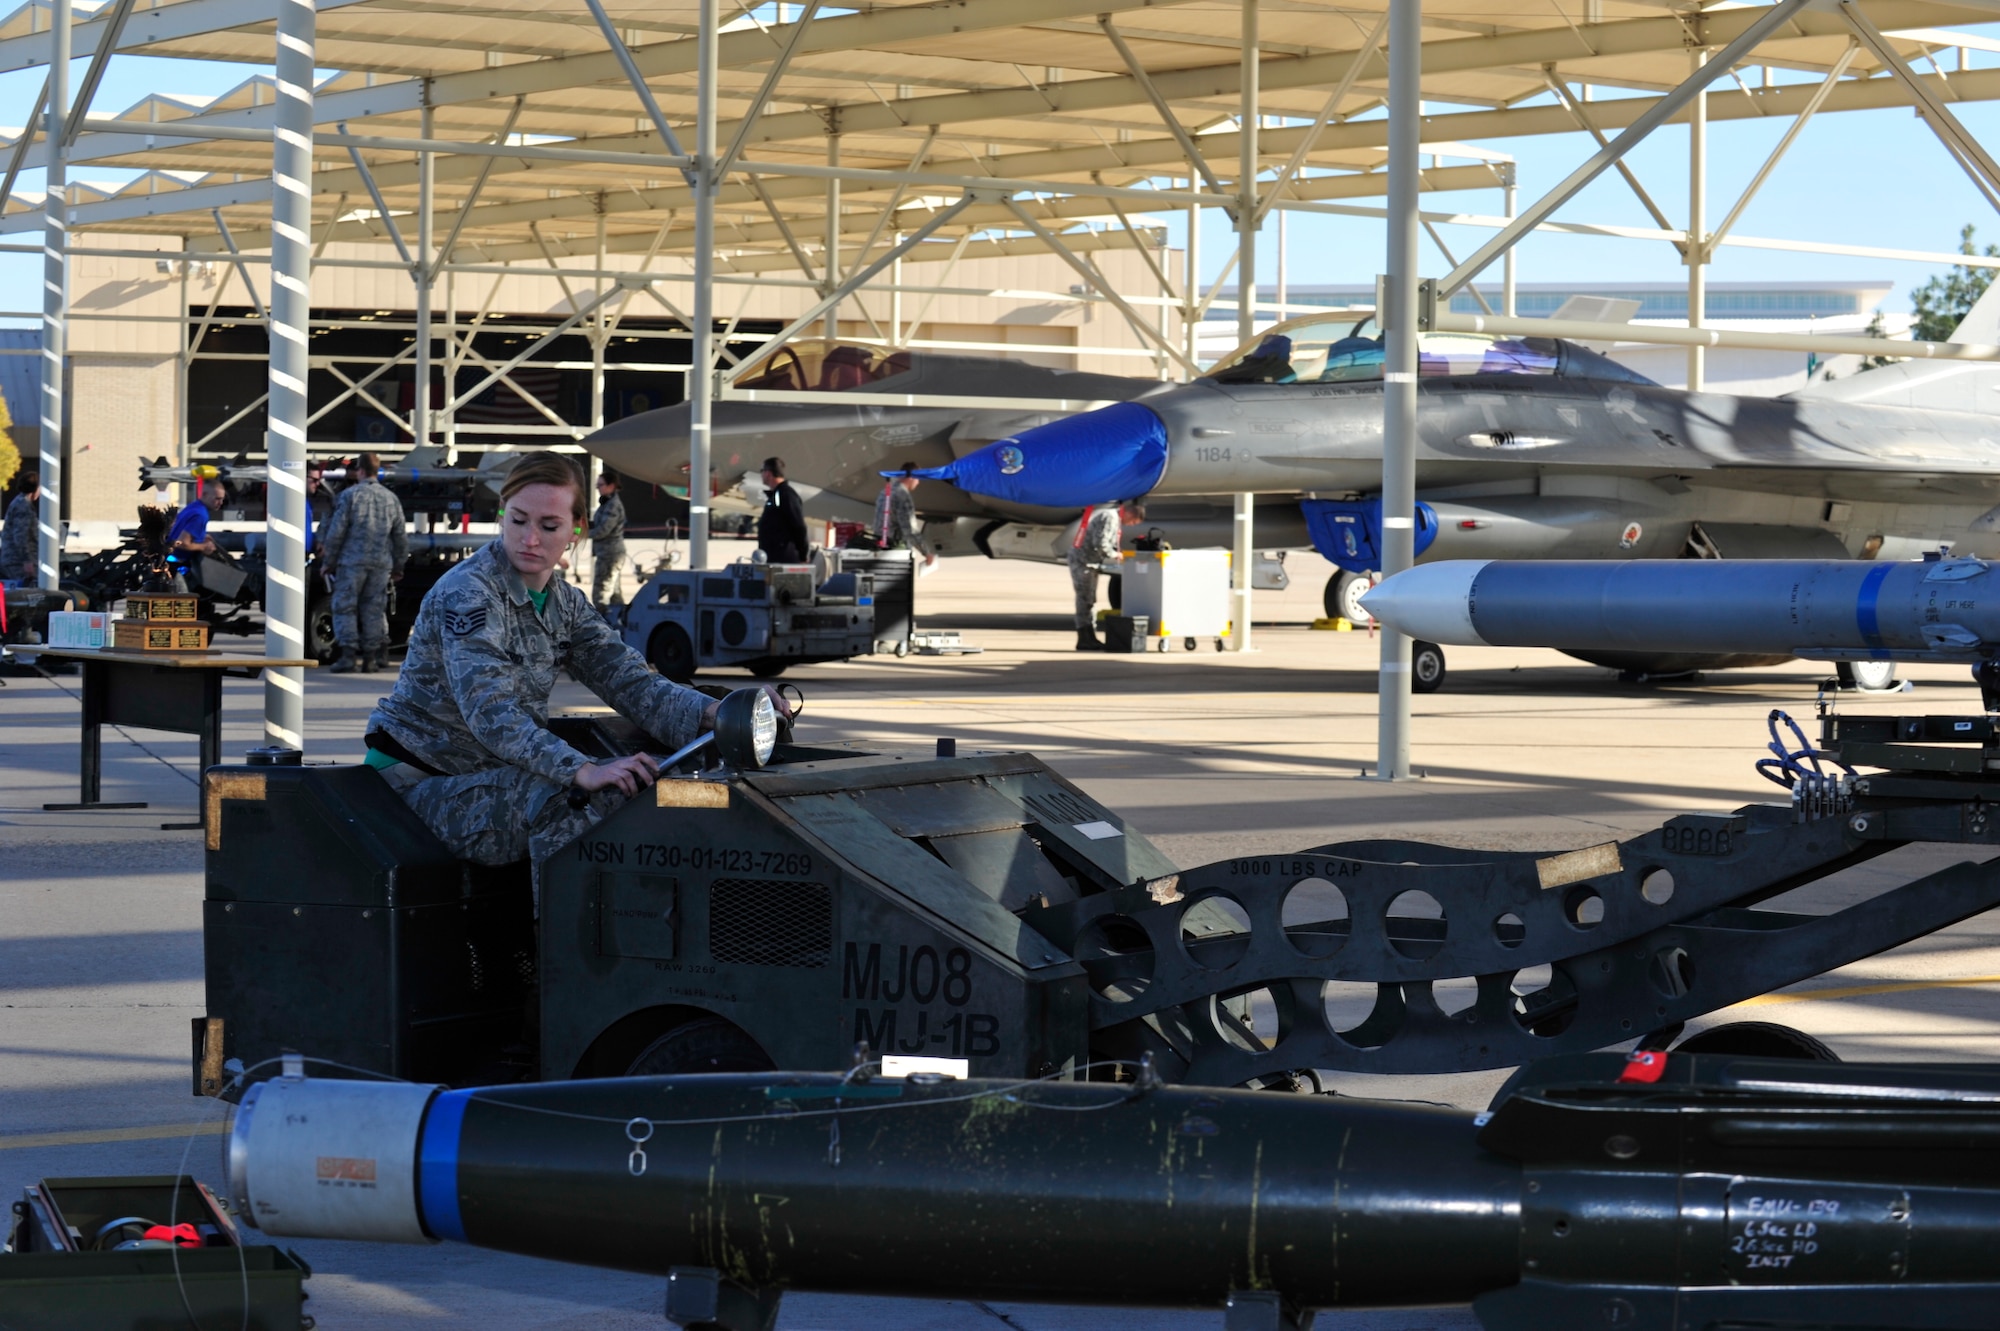 Staff Sgt. Cally Hatrick, 310st Aircraft Maintenance Unit weapons load crew member, prepares to load an F-16 Fighting Falcon during the 4th quarter weapon's loading competition Dec. 18 at Luke Air Force Base, Ariz. This quarter featured the first time the F-35 Lightning ll was used in the competition against the F-16 at Luke. Three man crews from the 61st AMU, 309th AMU, 310th AMU, and the 425th AMU went head to head to earn this quarters win. (U.S. Air Force photo by Senior Airman Grace Lee)